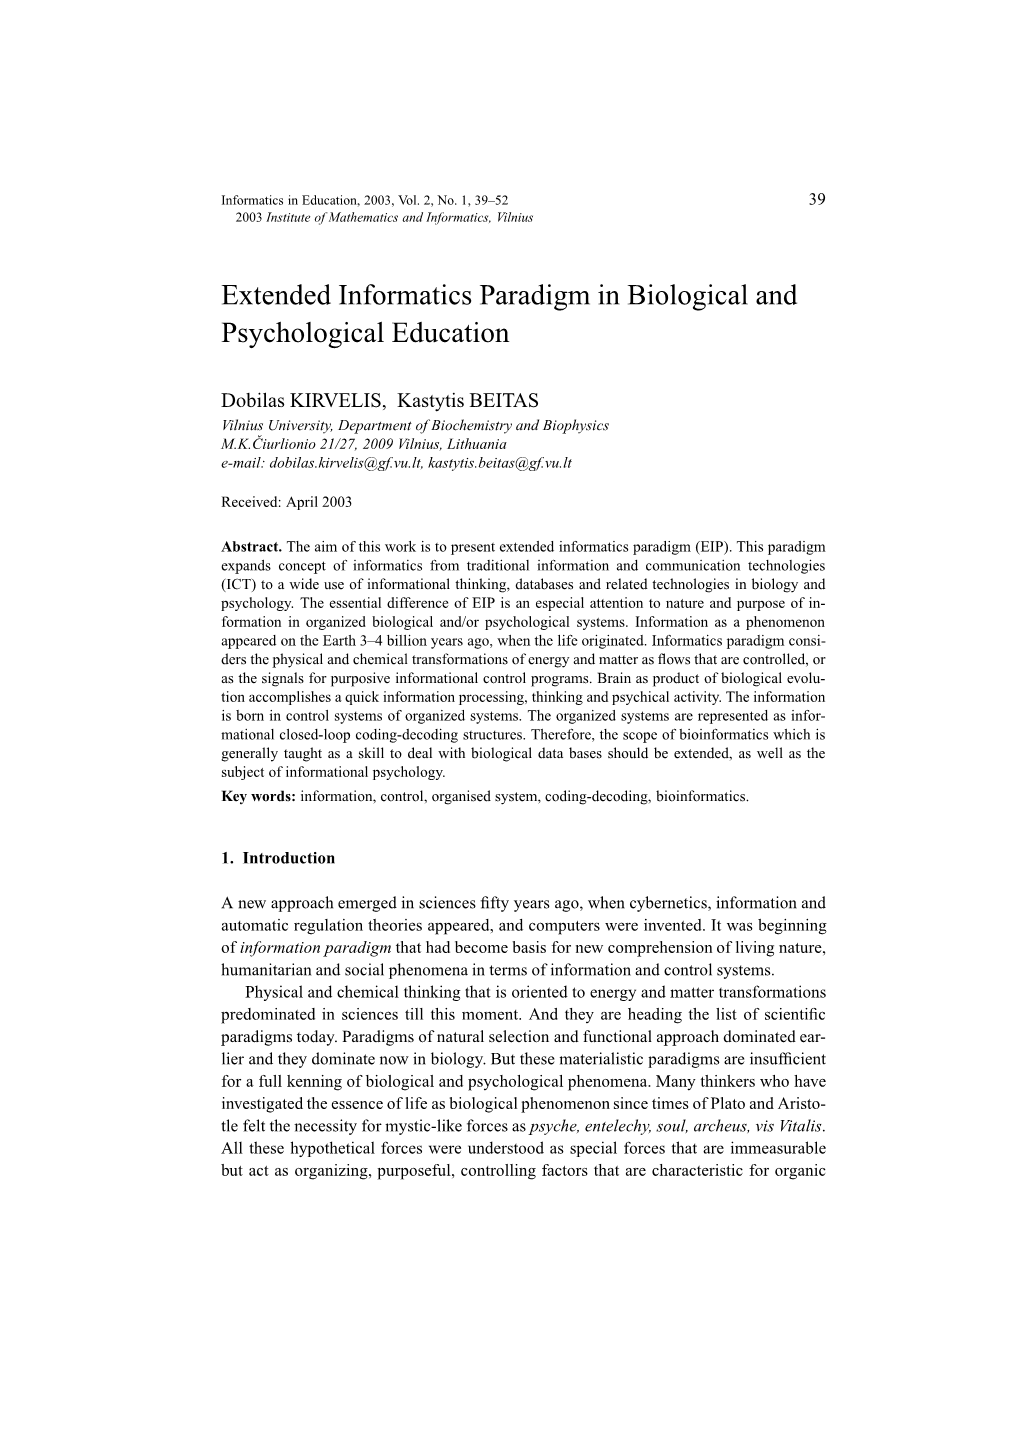 Extended Informatics Paradigm in Biological and Psychological Education